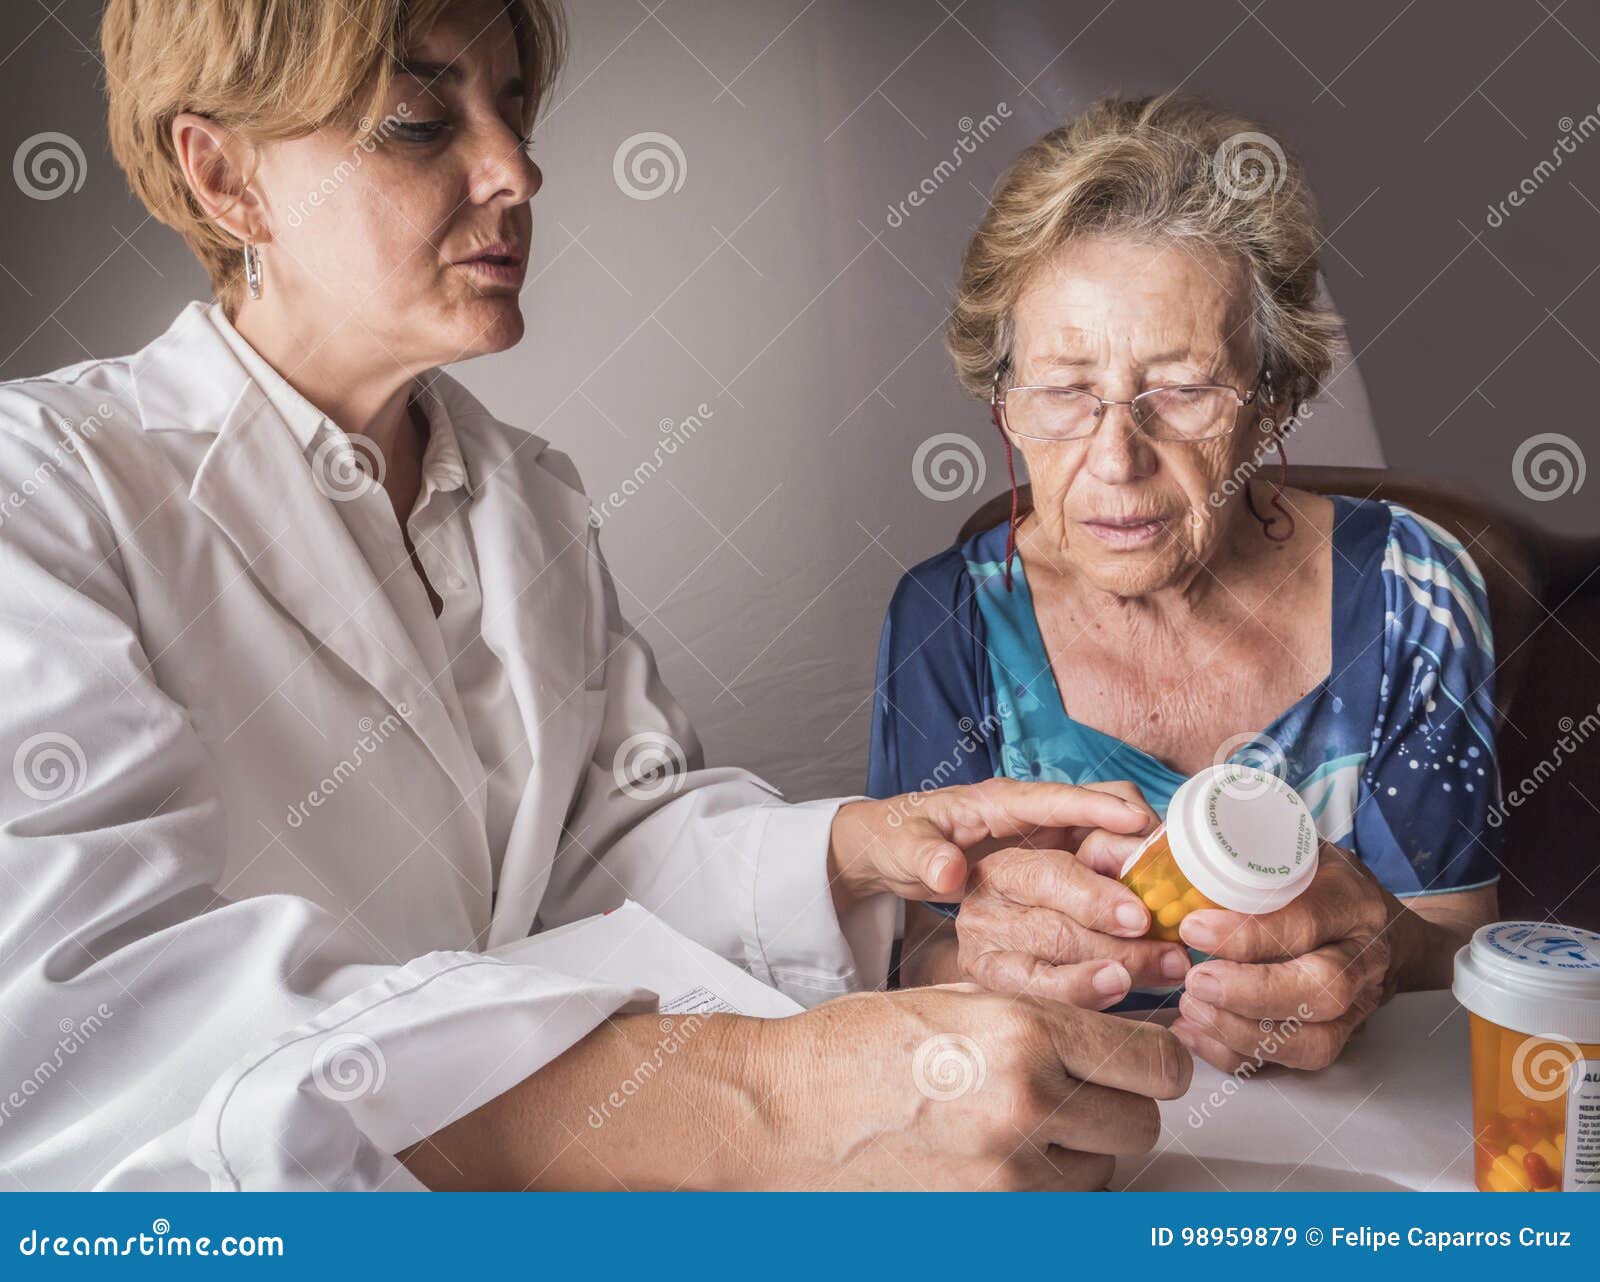 doctor explains to elderly daily dose of medication